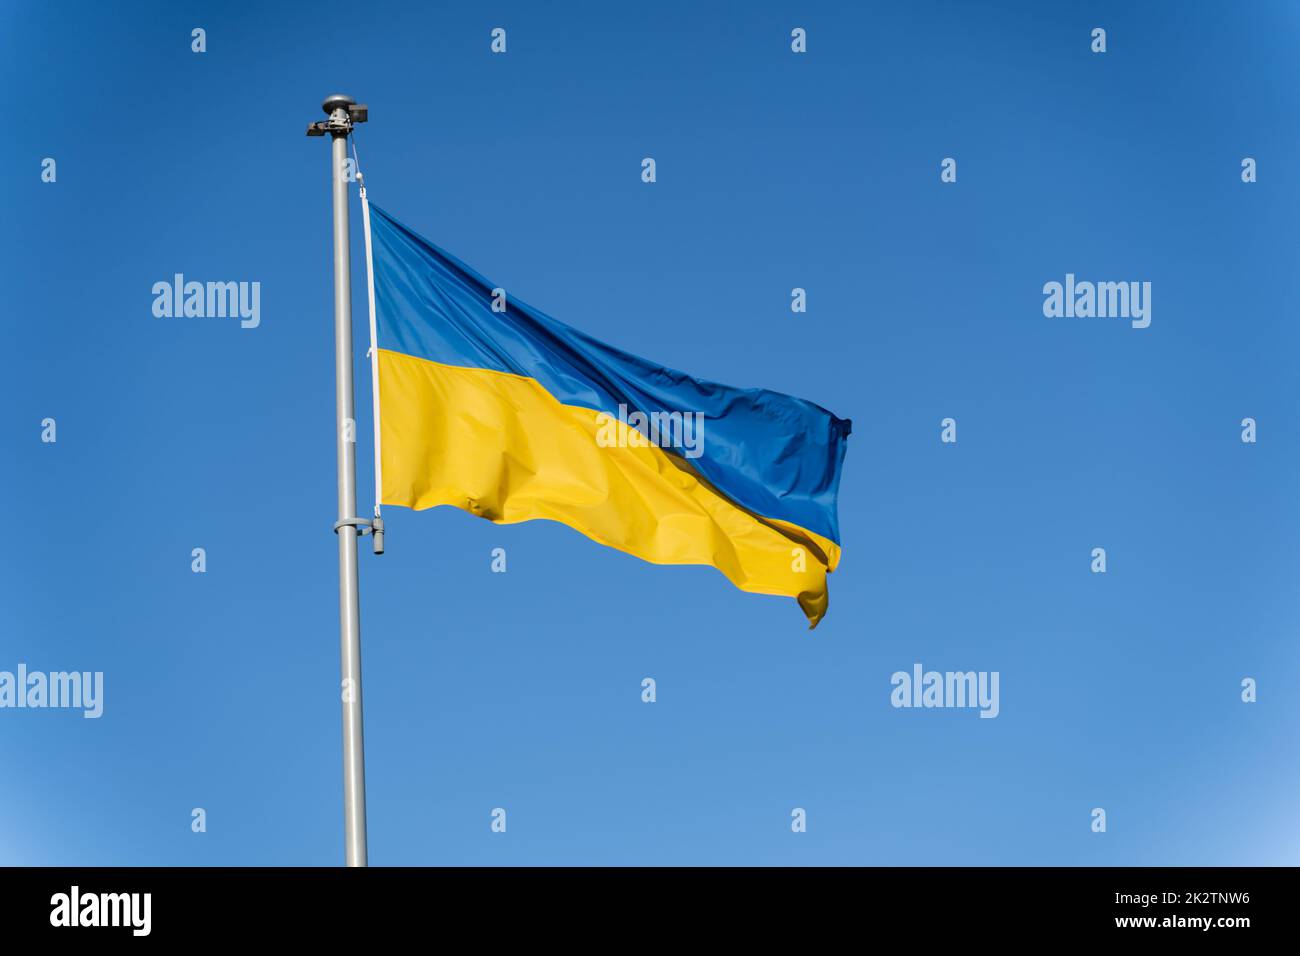 Blue-yellow Ukrainian flag flies against the background of clear blue sky Stock Photo